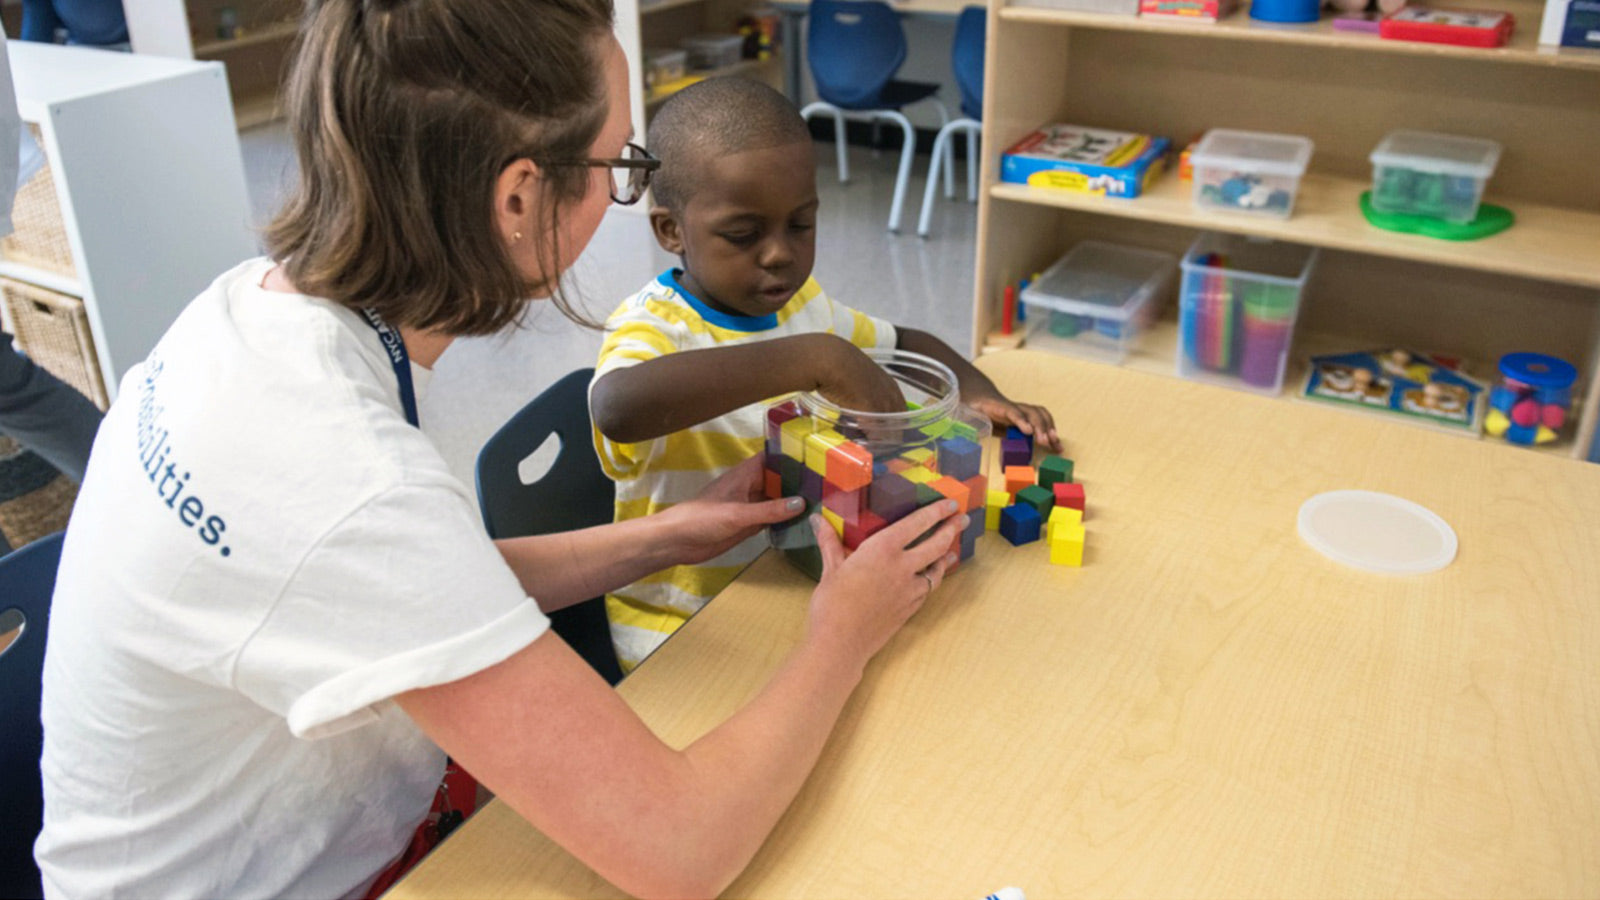 A NEXT for Autism volunteer and child play with legos